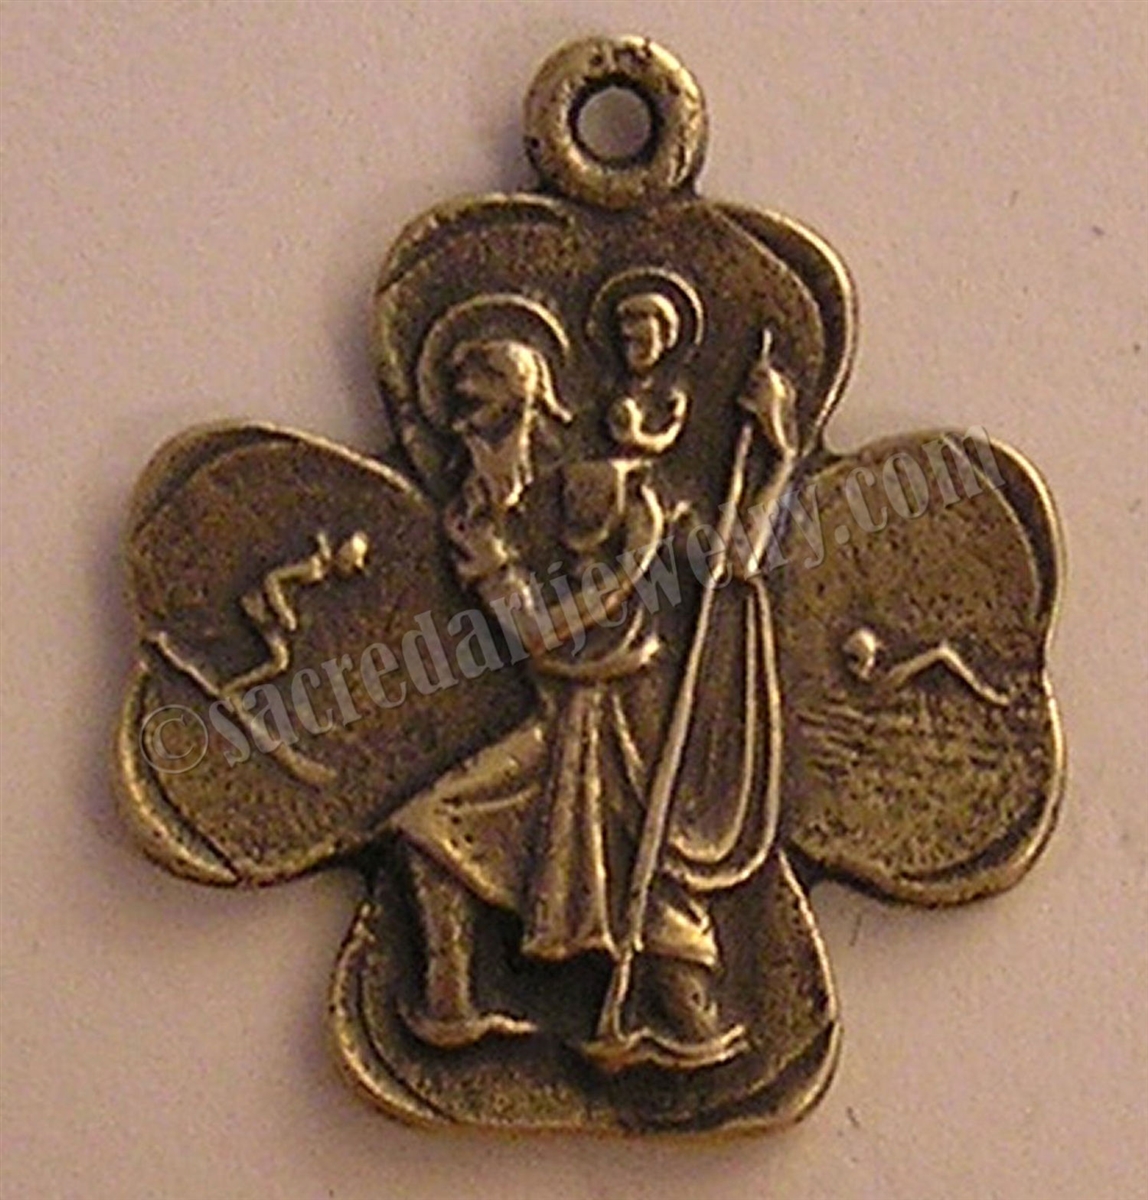 9ct Solid Gold St Christopher Pendant | Hersey & Son Silversmiths